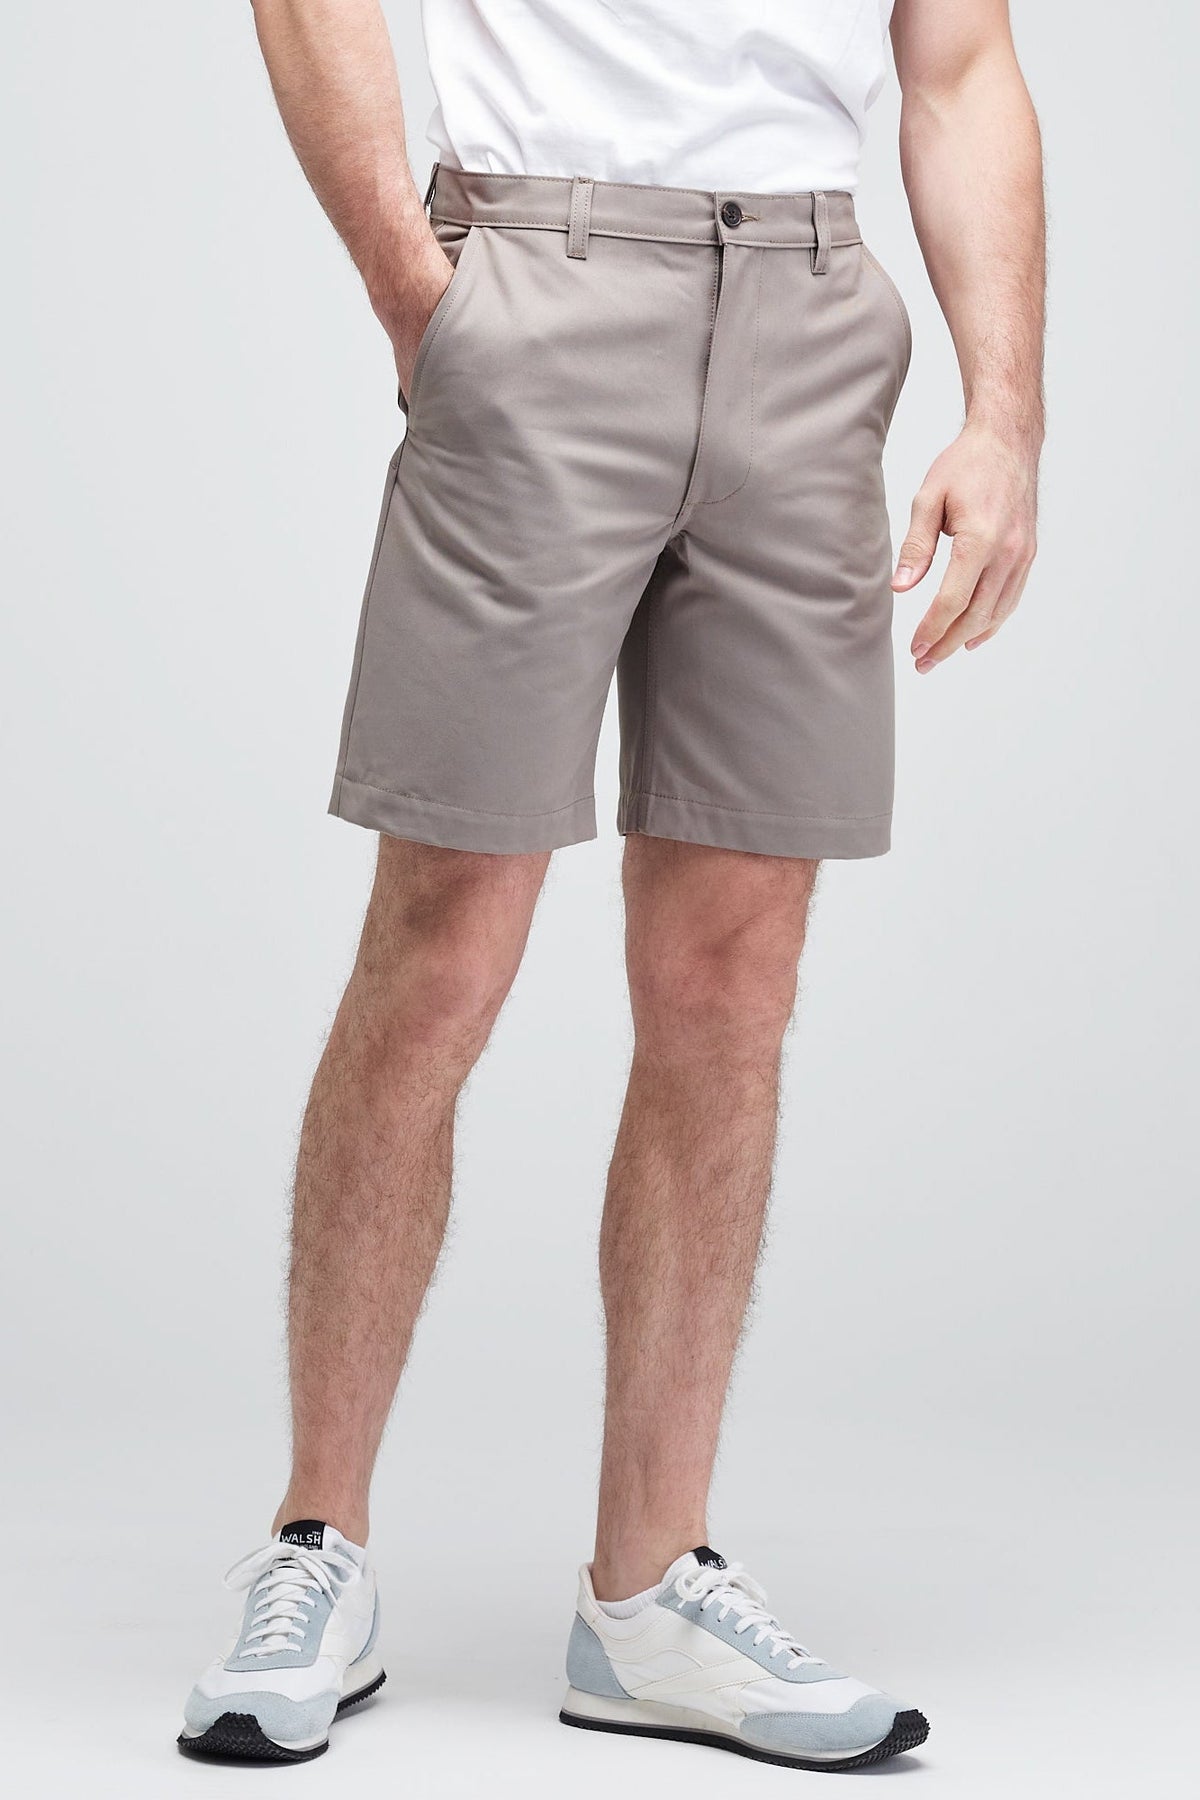 
            pocket detail of white male in stone grey classic shorts